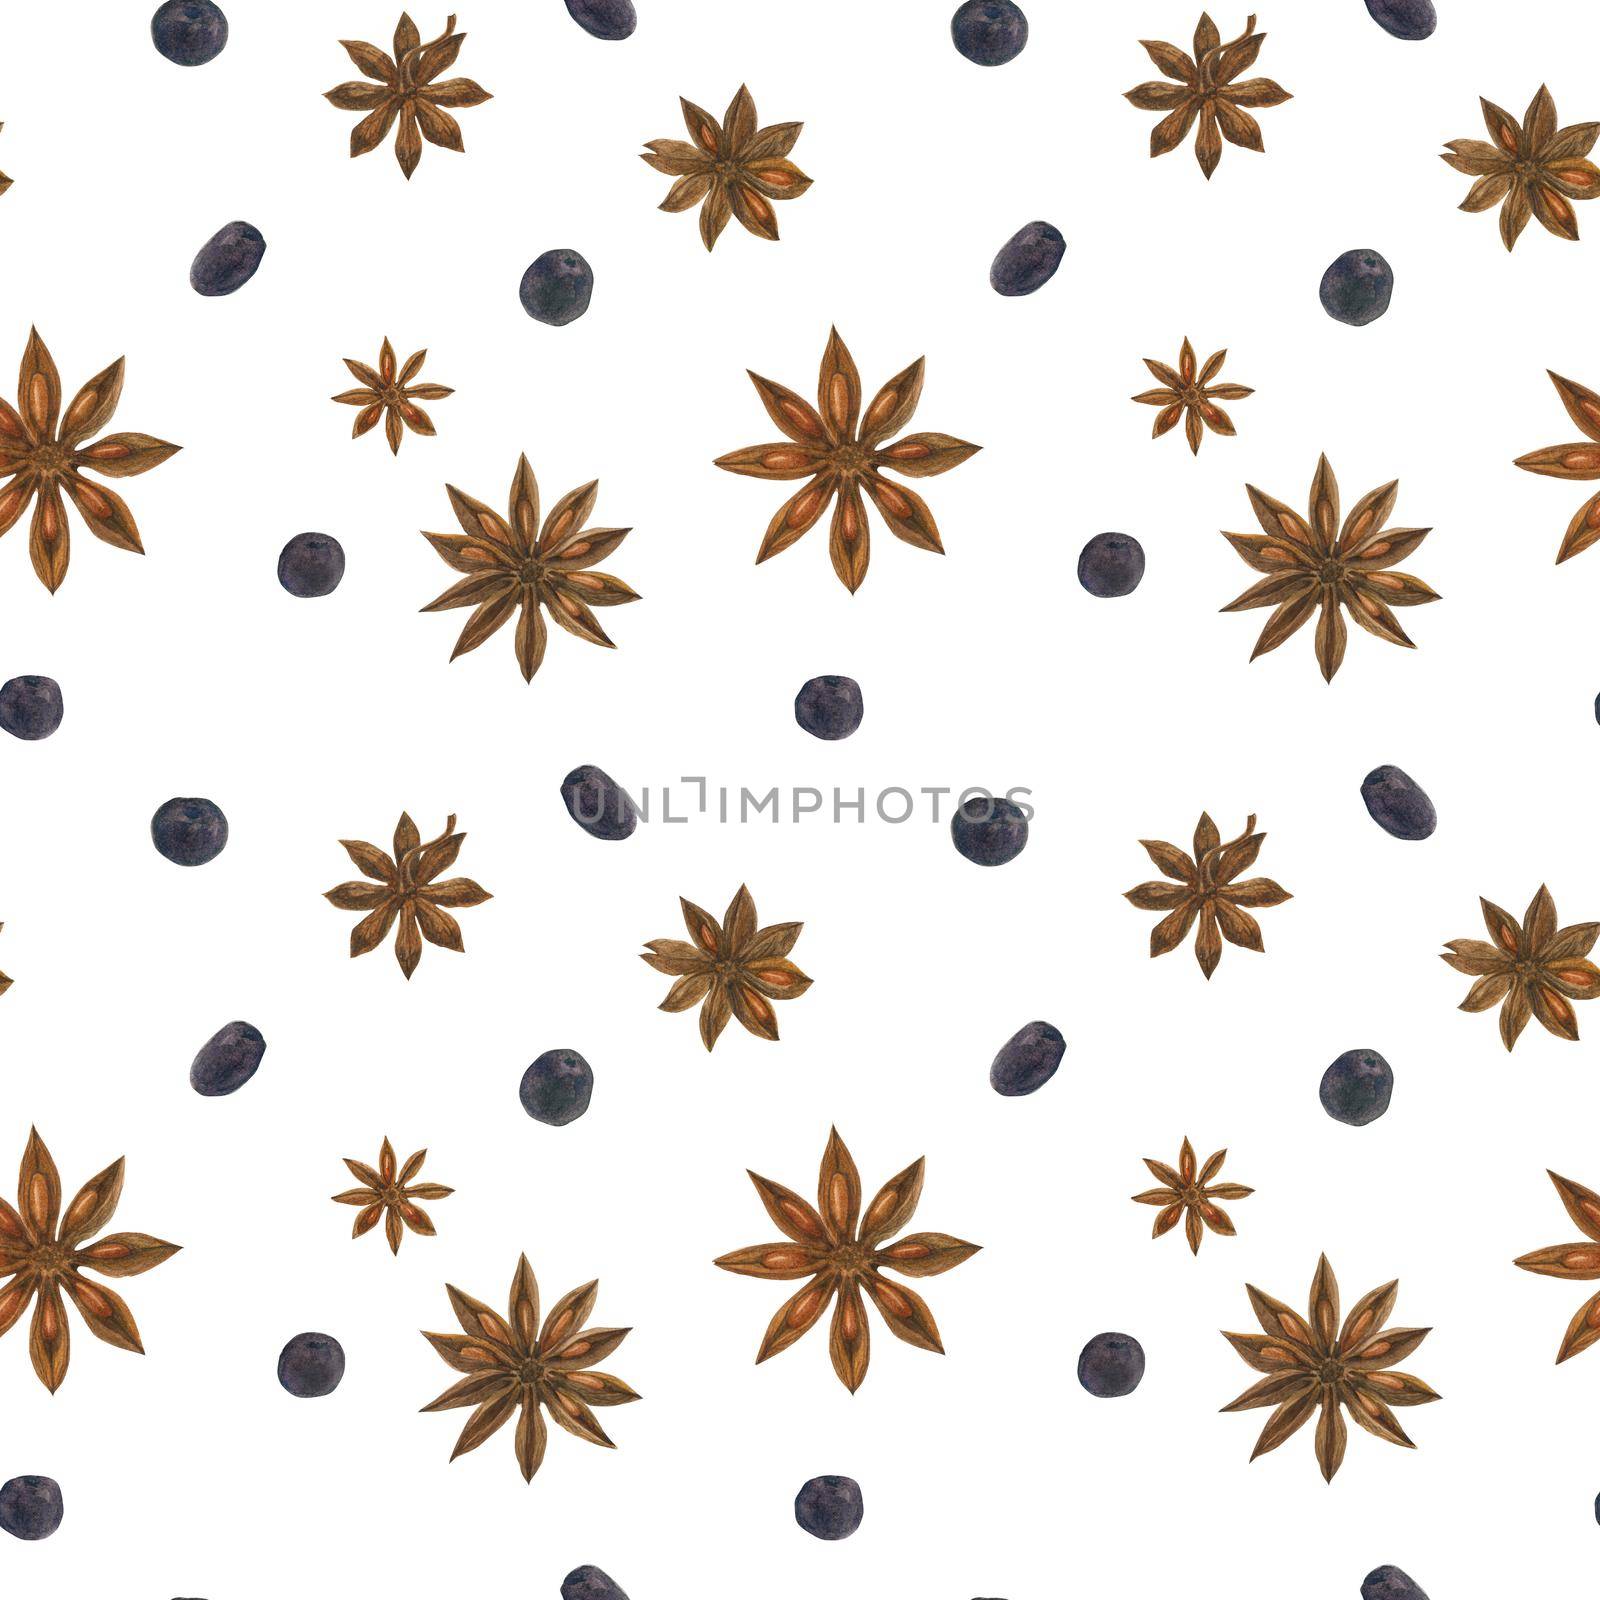 Dried star anise and berries white seamless pattern by Xeniasnowstorm